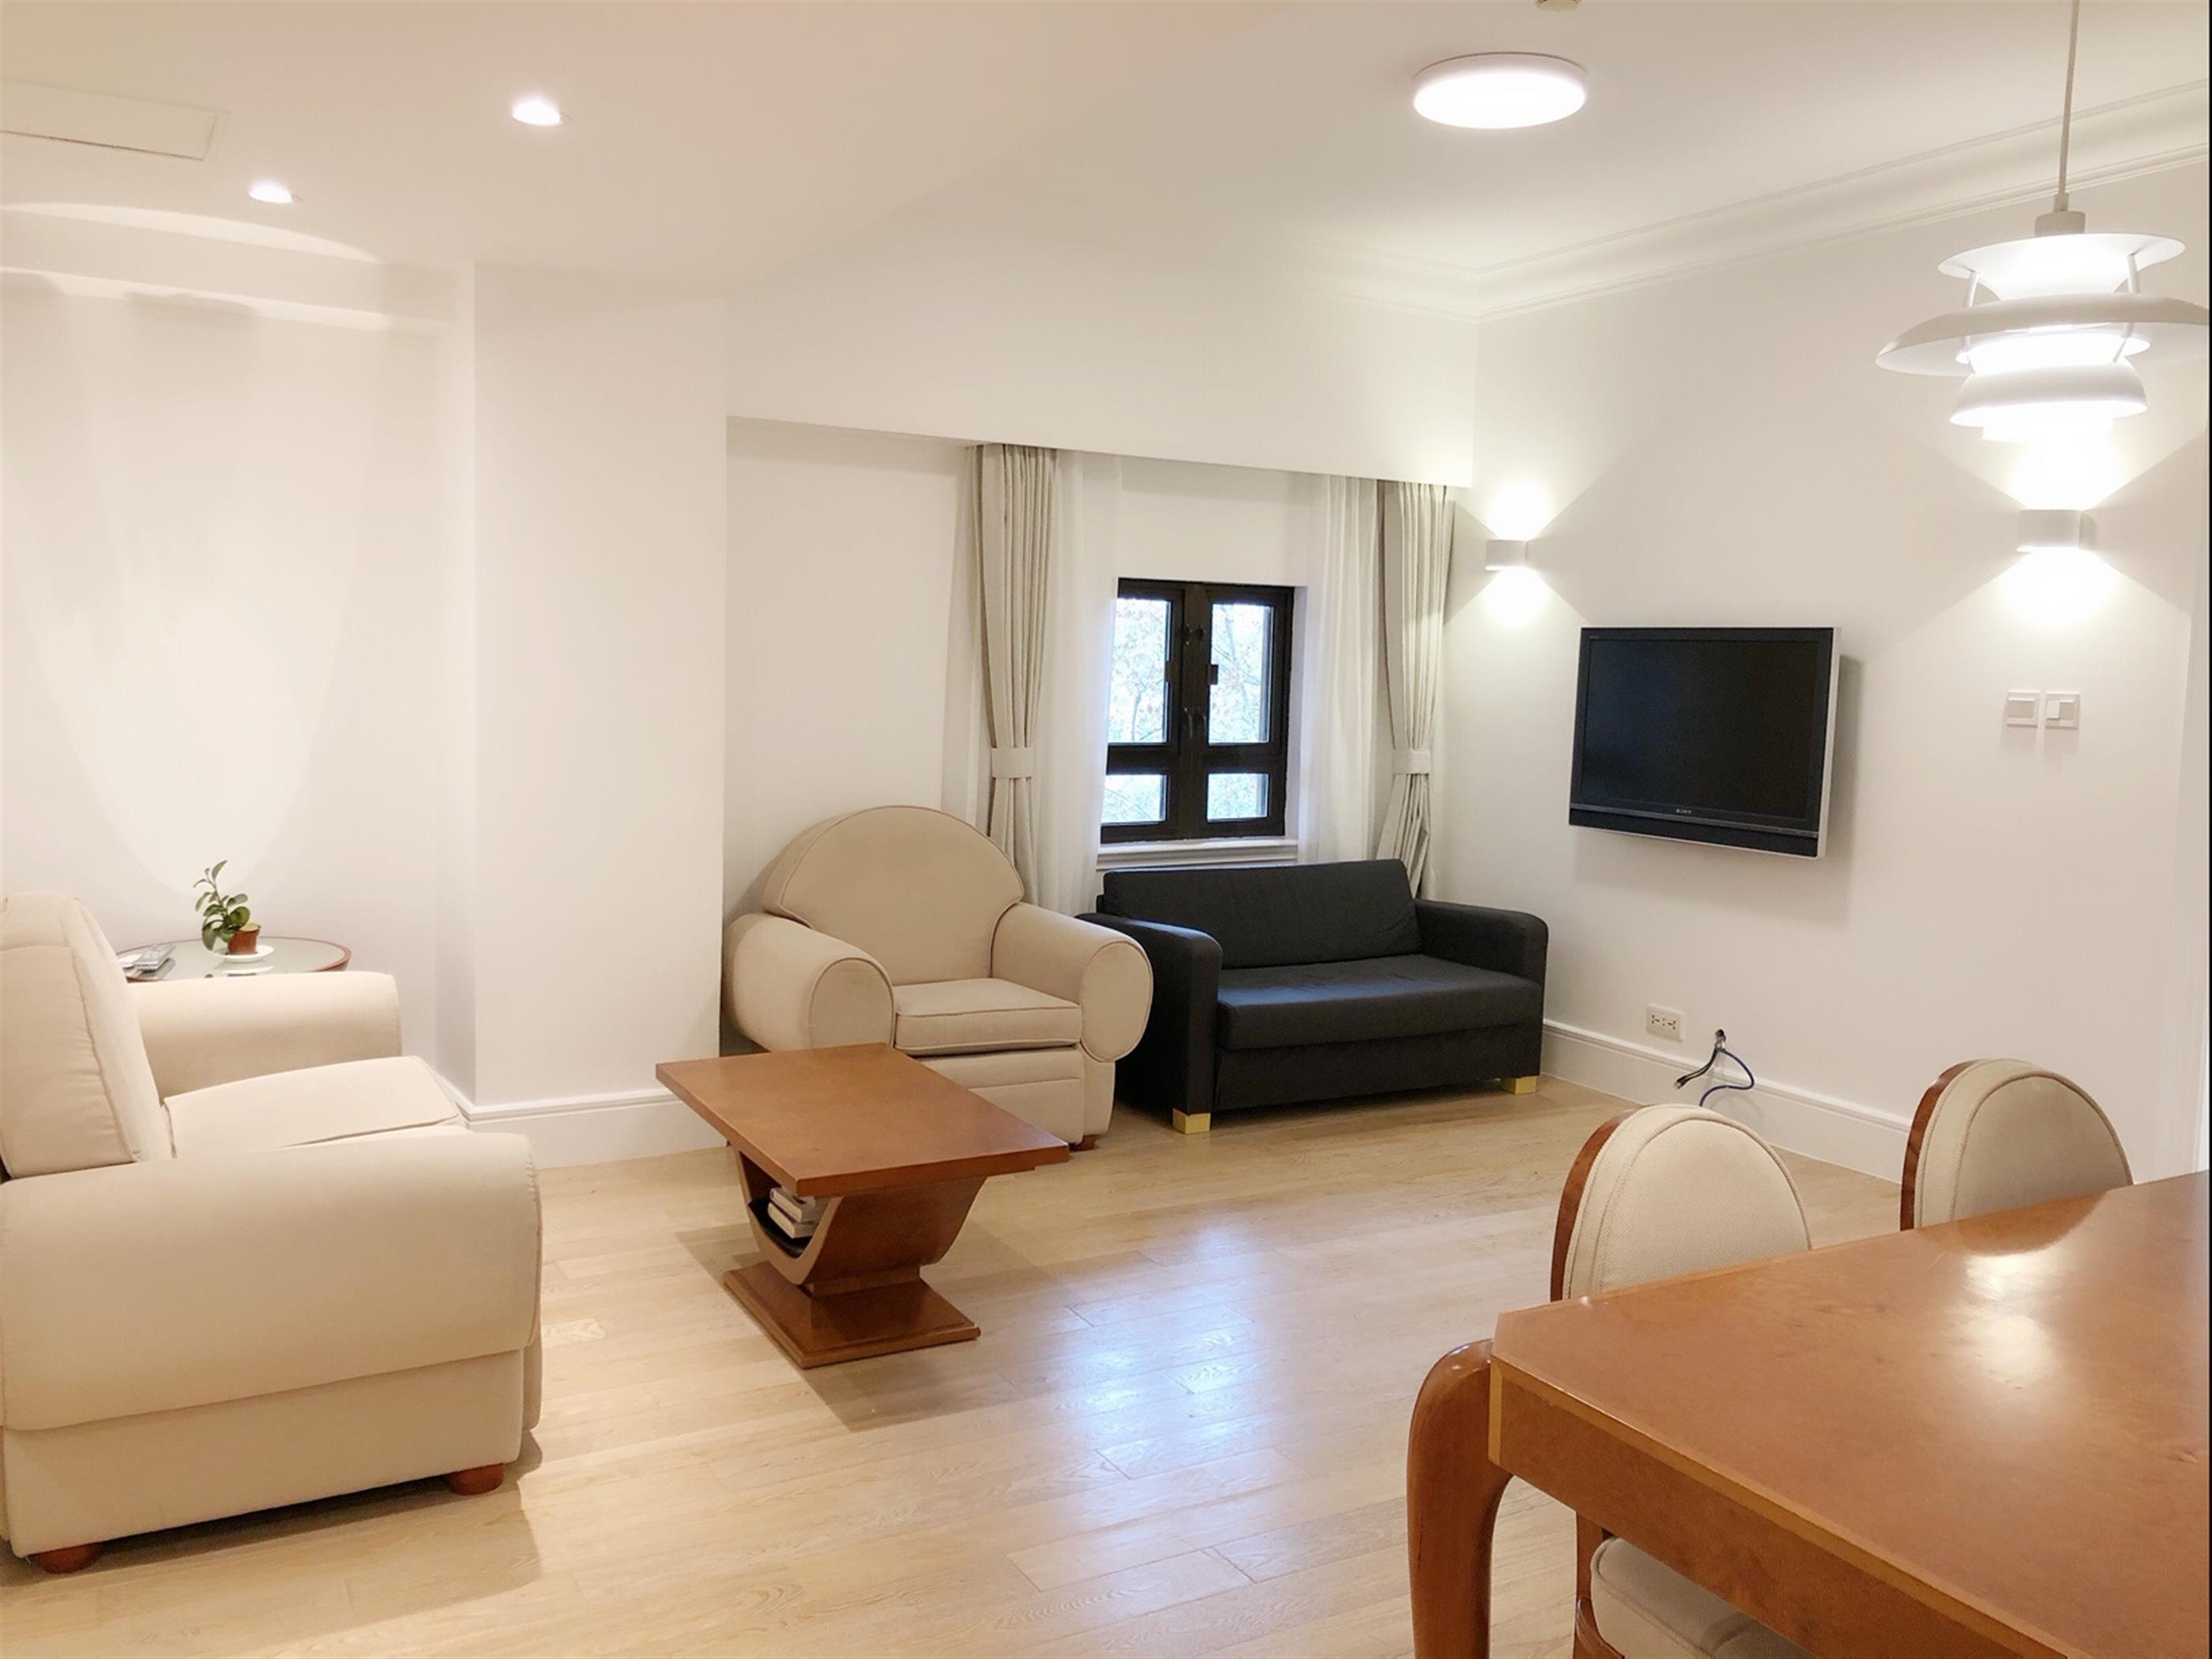 New furniture Newly-Renovated Prestigious FFC 1BR Apartment Nr LN 1 Hengshan Rd for Rent in Shanghai